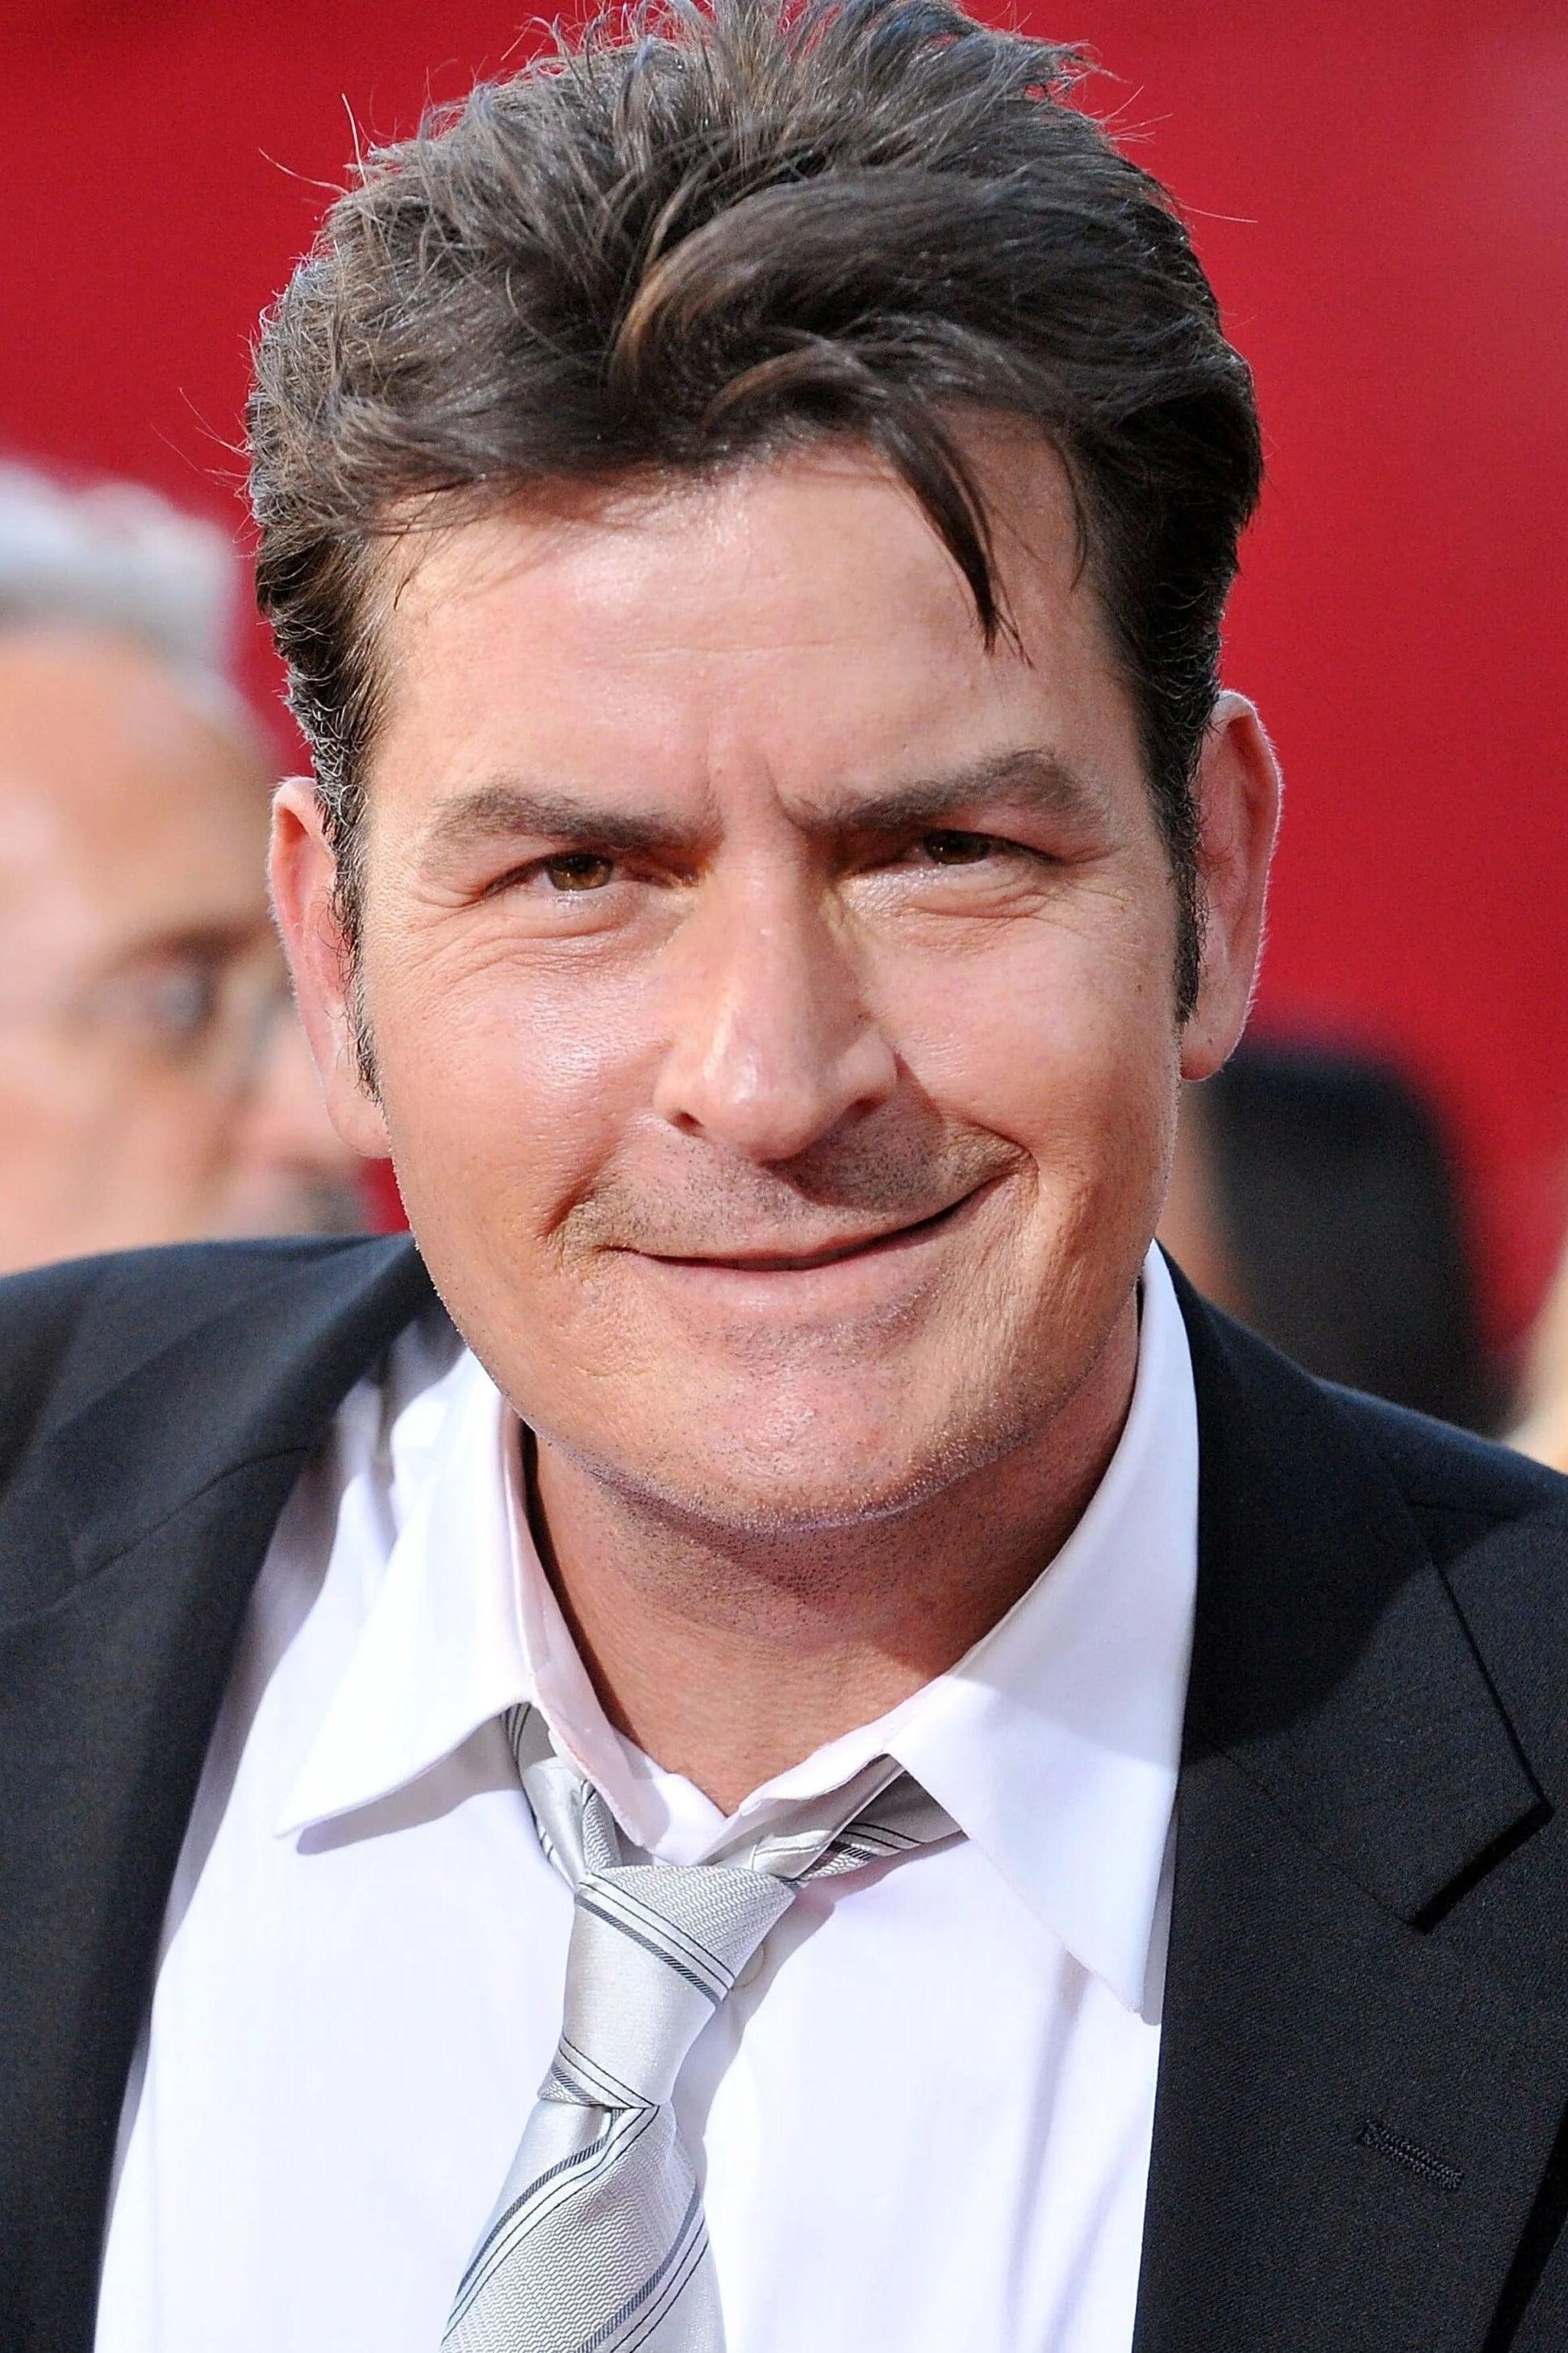 Charlie Sheen | Thief (uncredited)